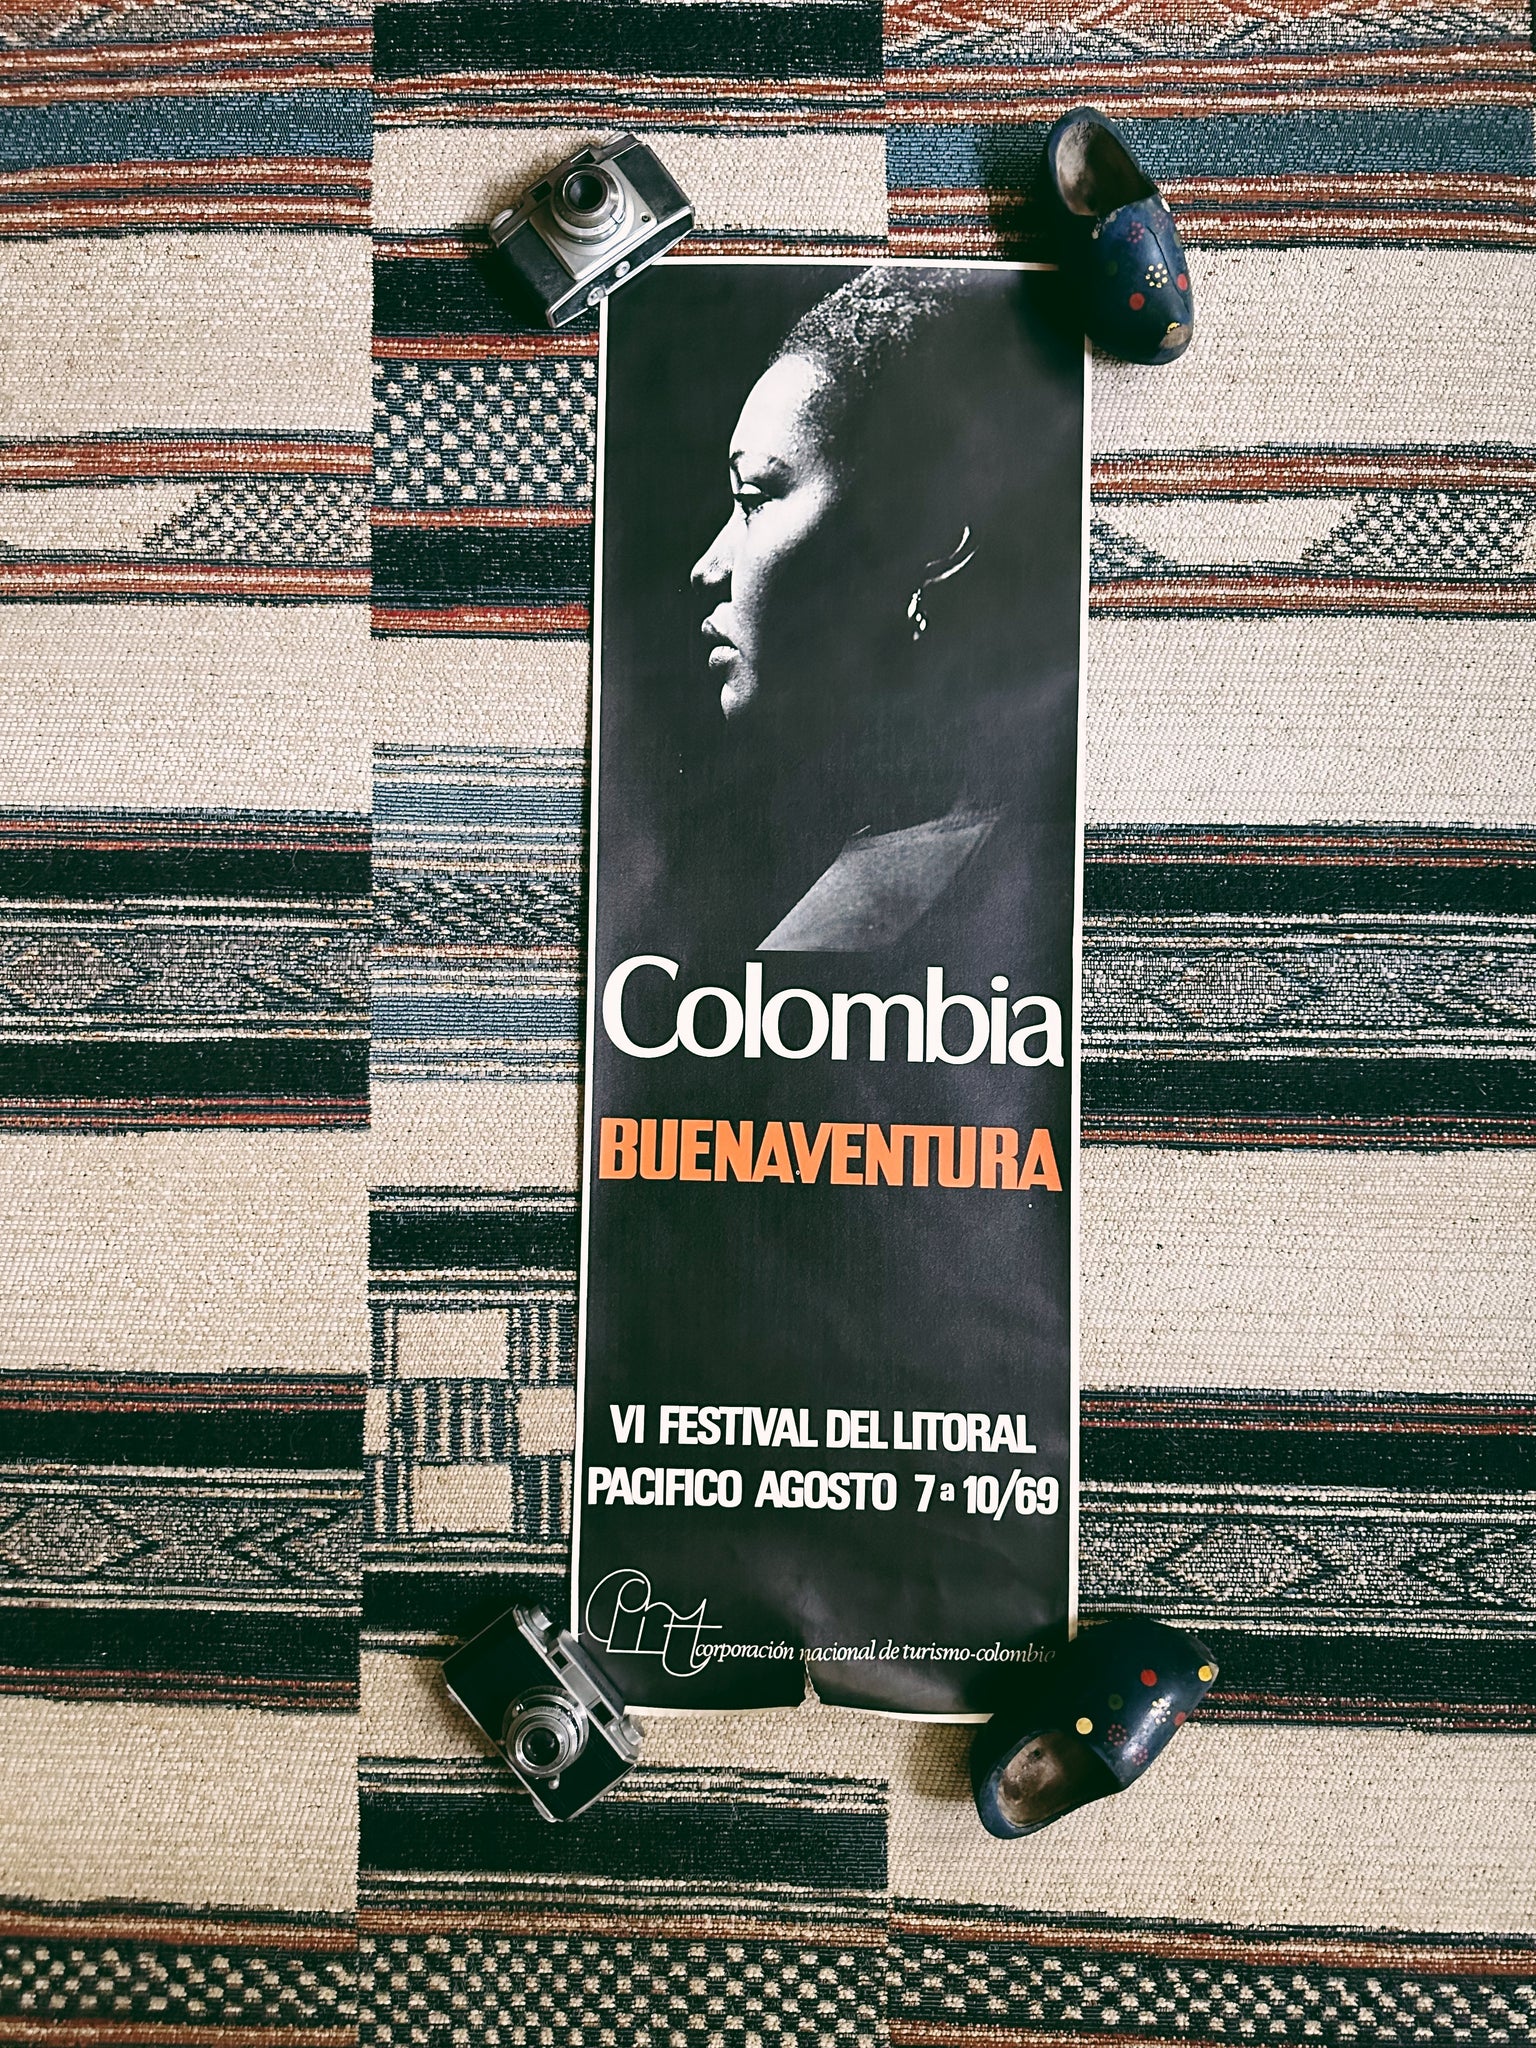 Vintage Colombia Literary Festival Poster